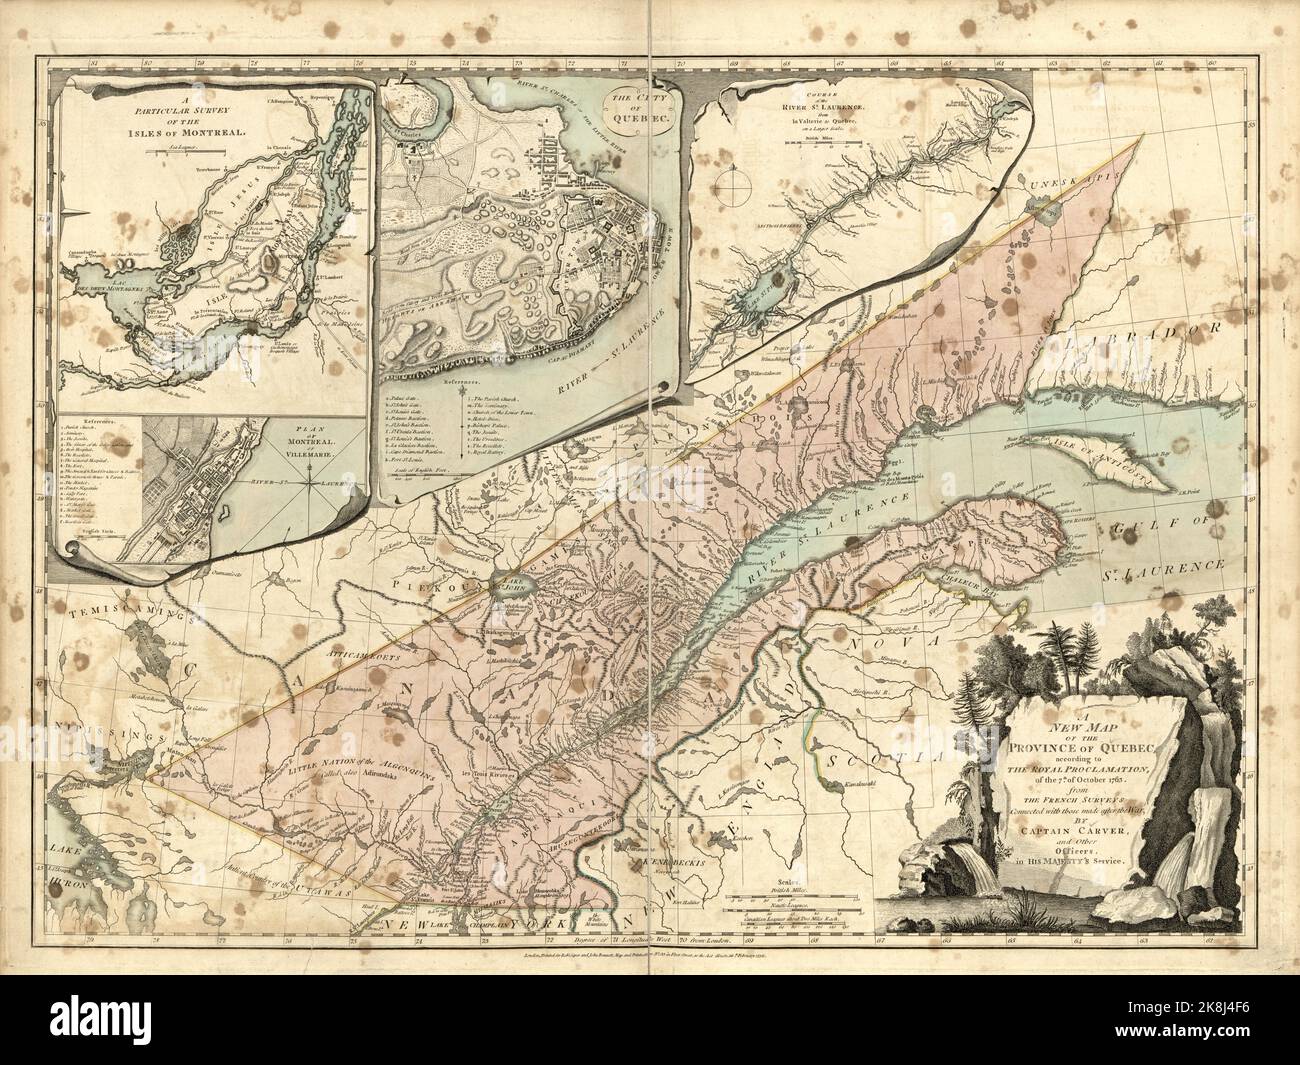 A vintage map of the Province of Quebec, Canada, according to the Royal Proclamation of the 7th of October1763 that followed the Treaty of Paris. Insets show the island of Montreal and Quebec City. Stock Photo